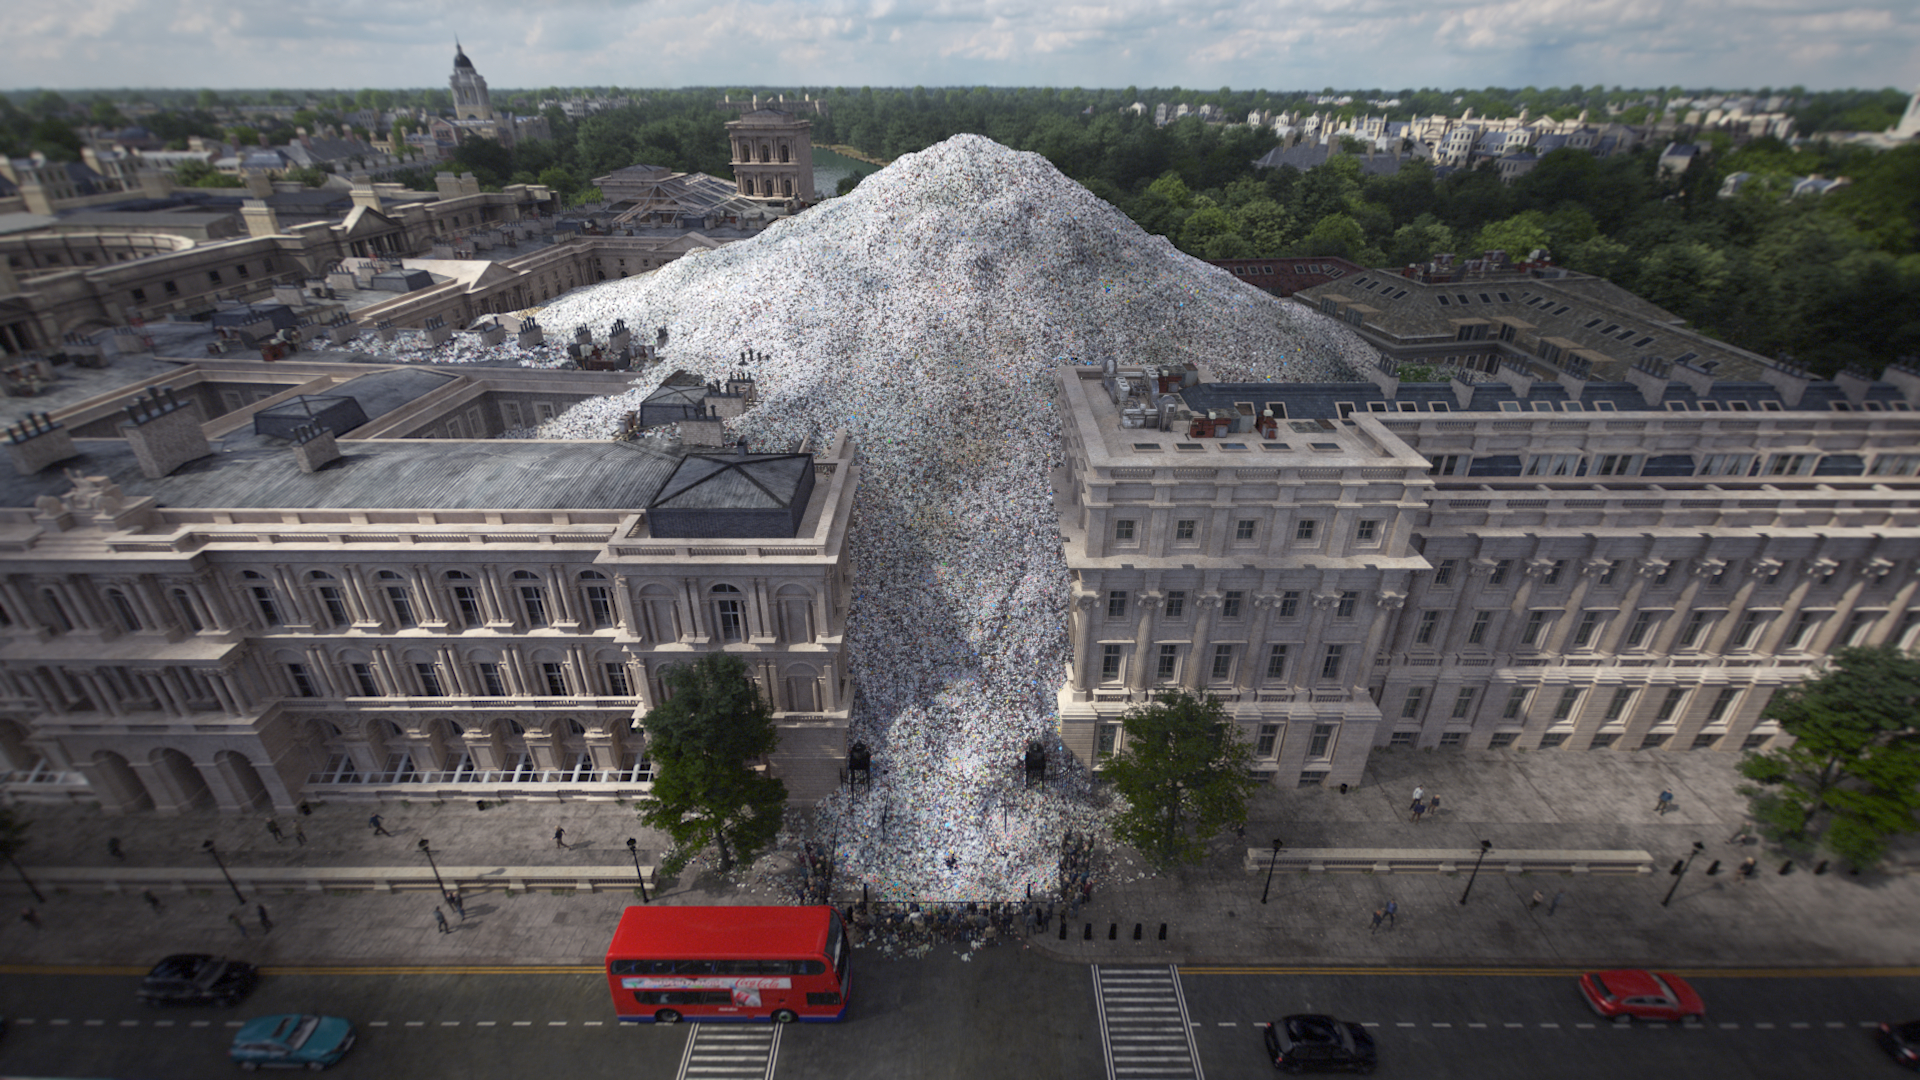 Realistic computer rendering shows an aerial view of ornate municipal buildings dwarfed by a gigantic pile of plastic waste. A red London bus drives down the road in the foreground.